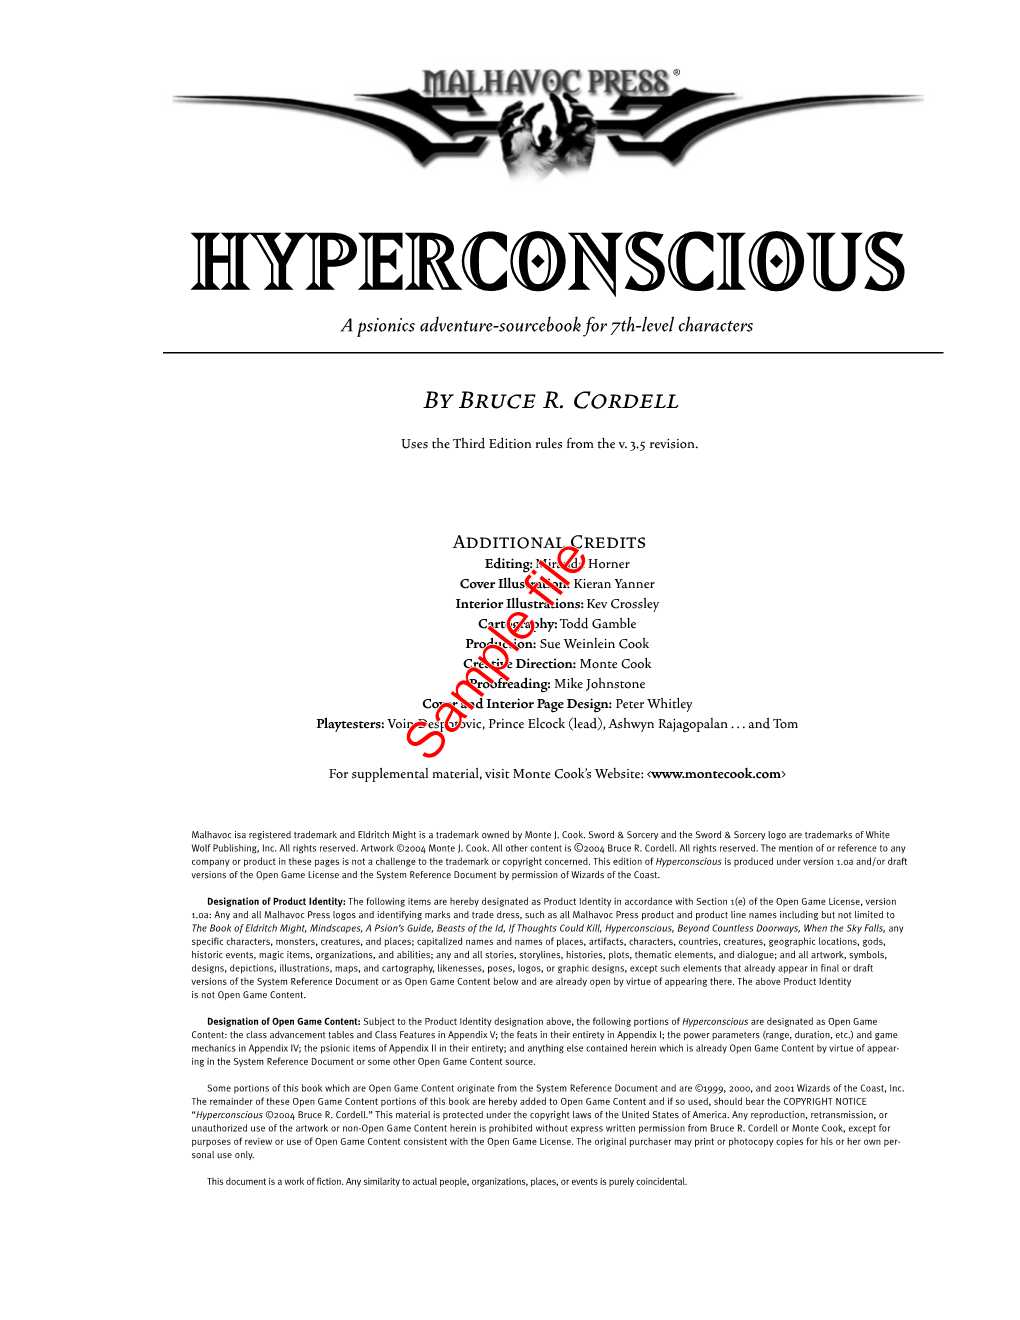 HYPERCONSCIOUS a Psionics Adventure-Sourcebook for 7Th-Level Characters